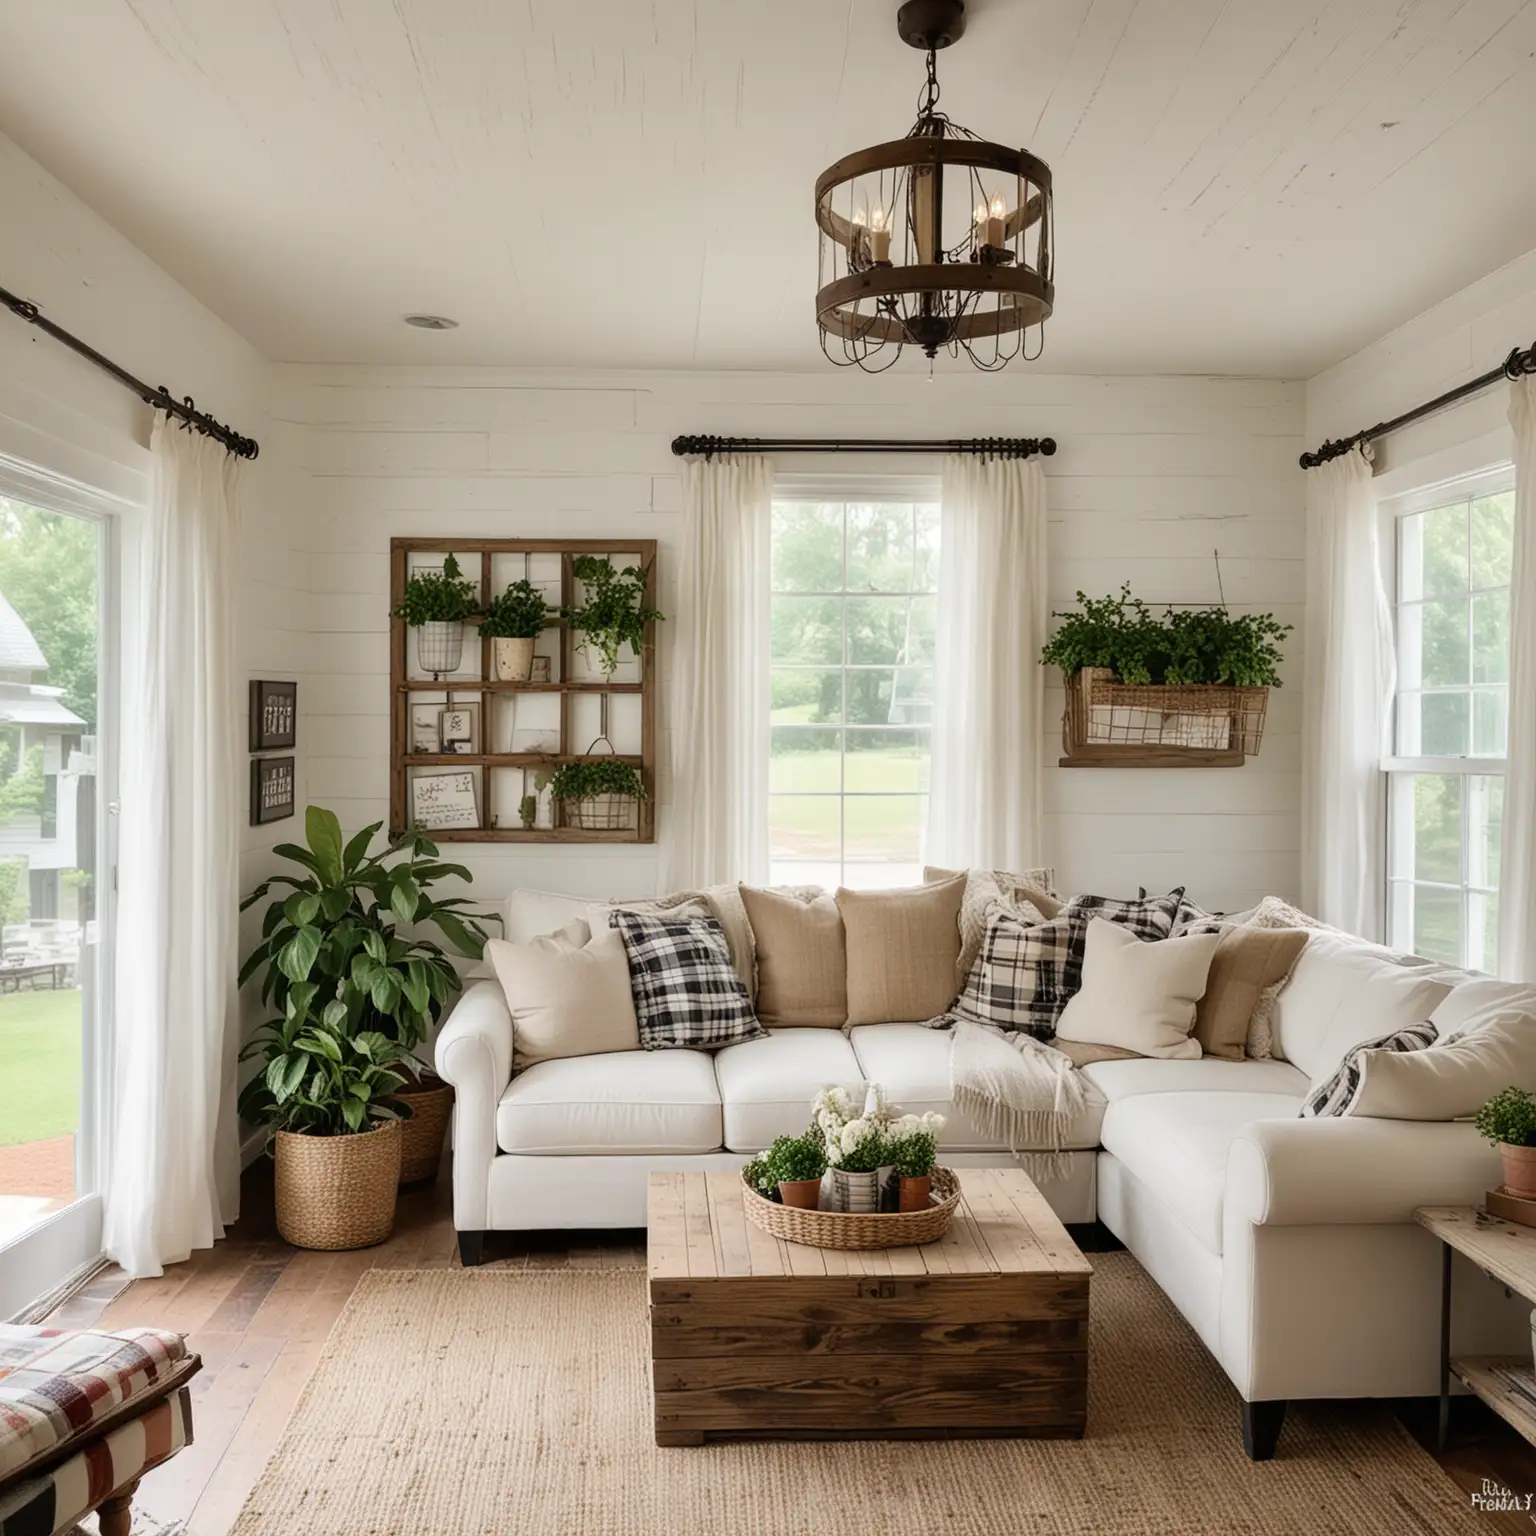 Cozy-Farmhouse-Living-Room-Interior-with-Vintage-Decor-and-Modern-Comforts